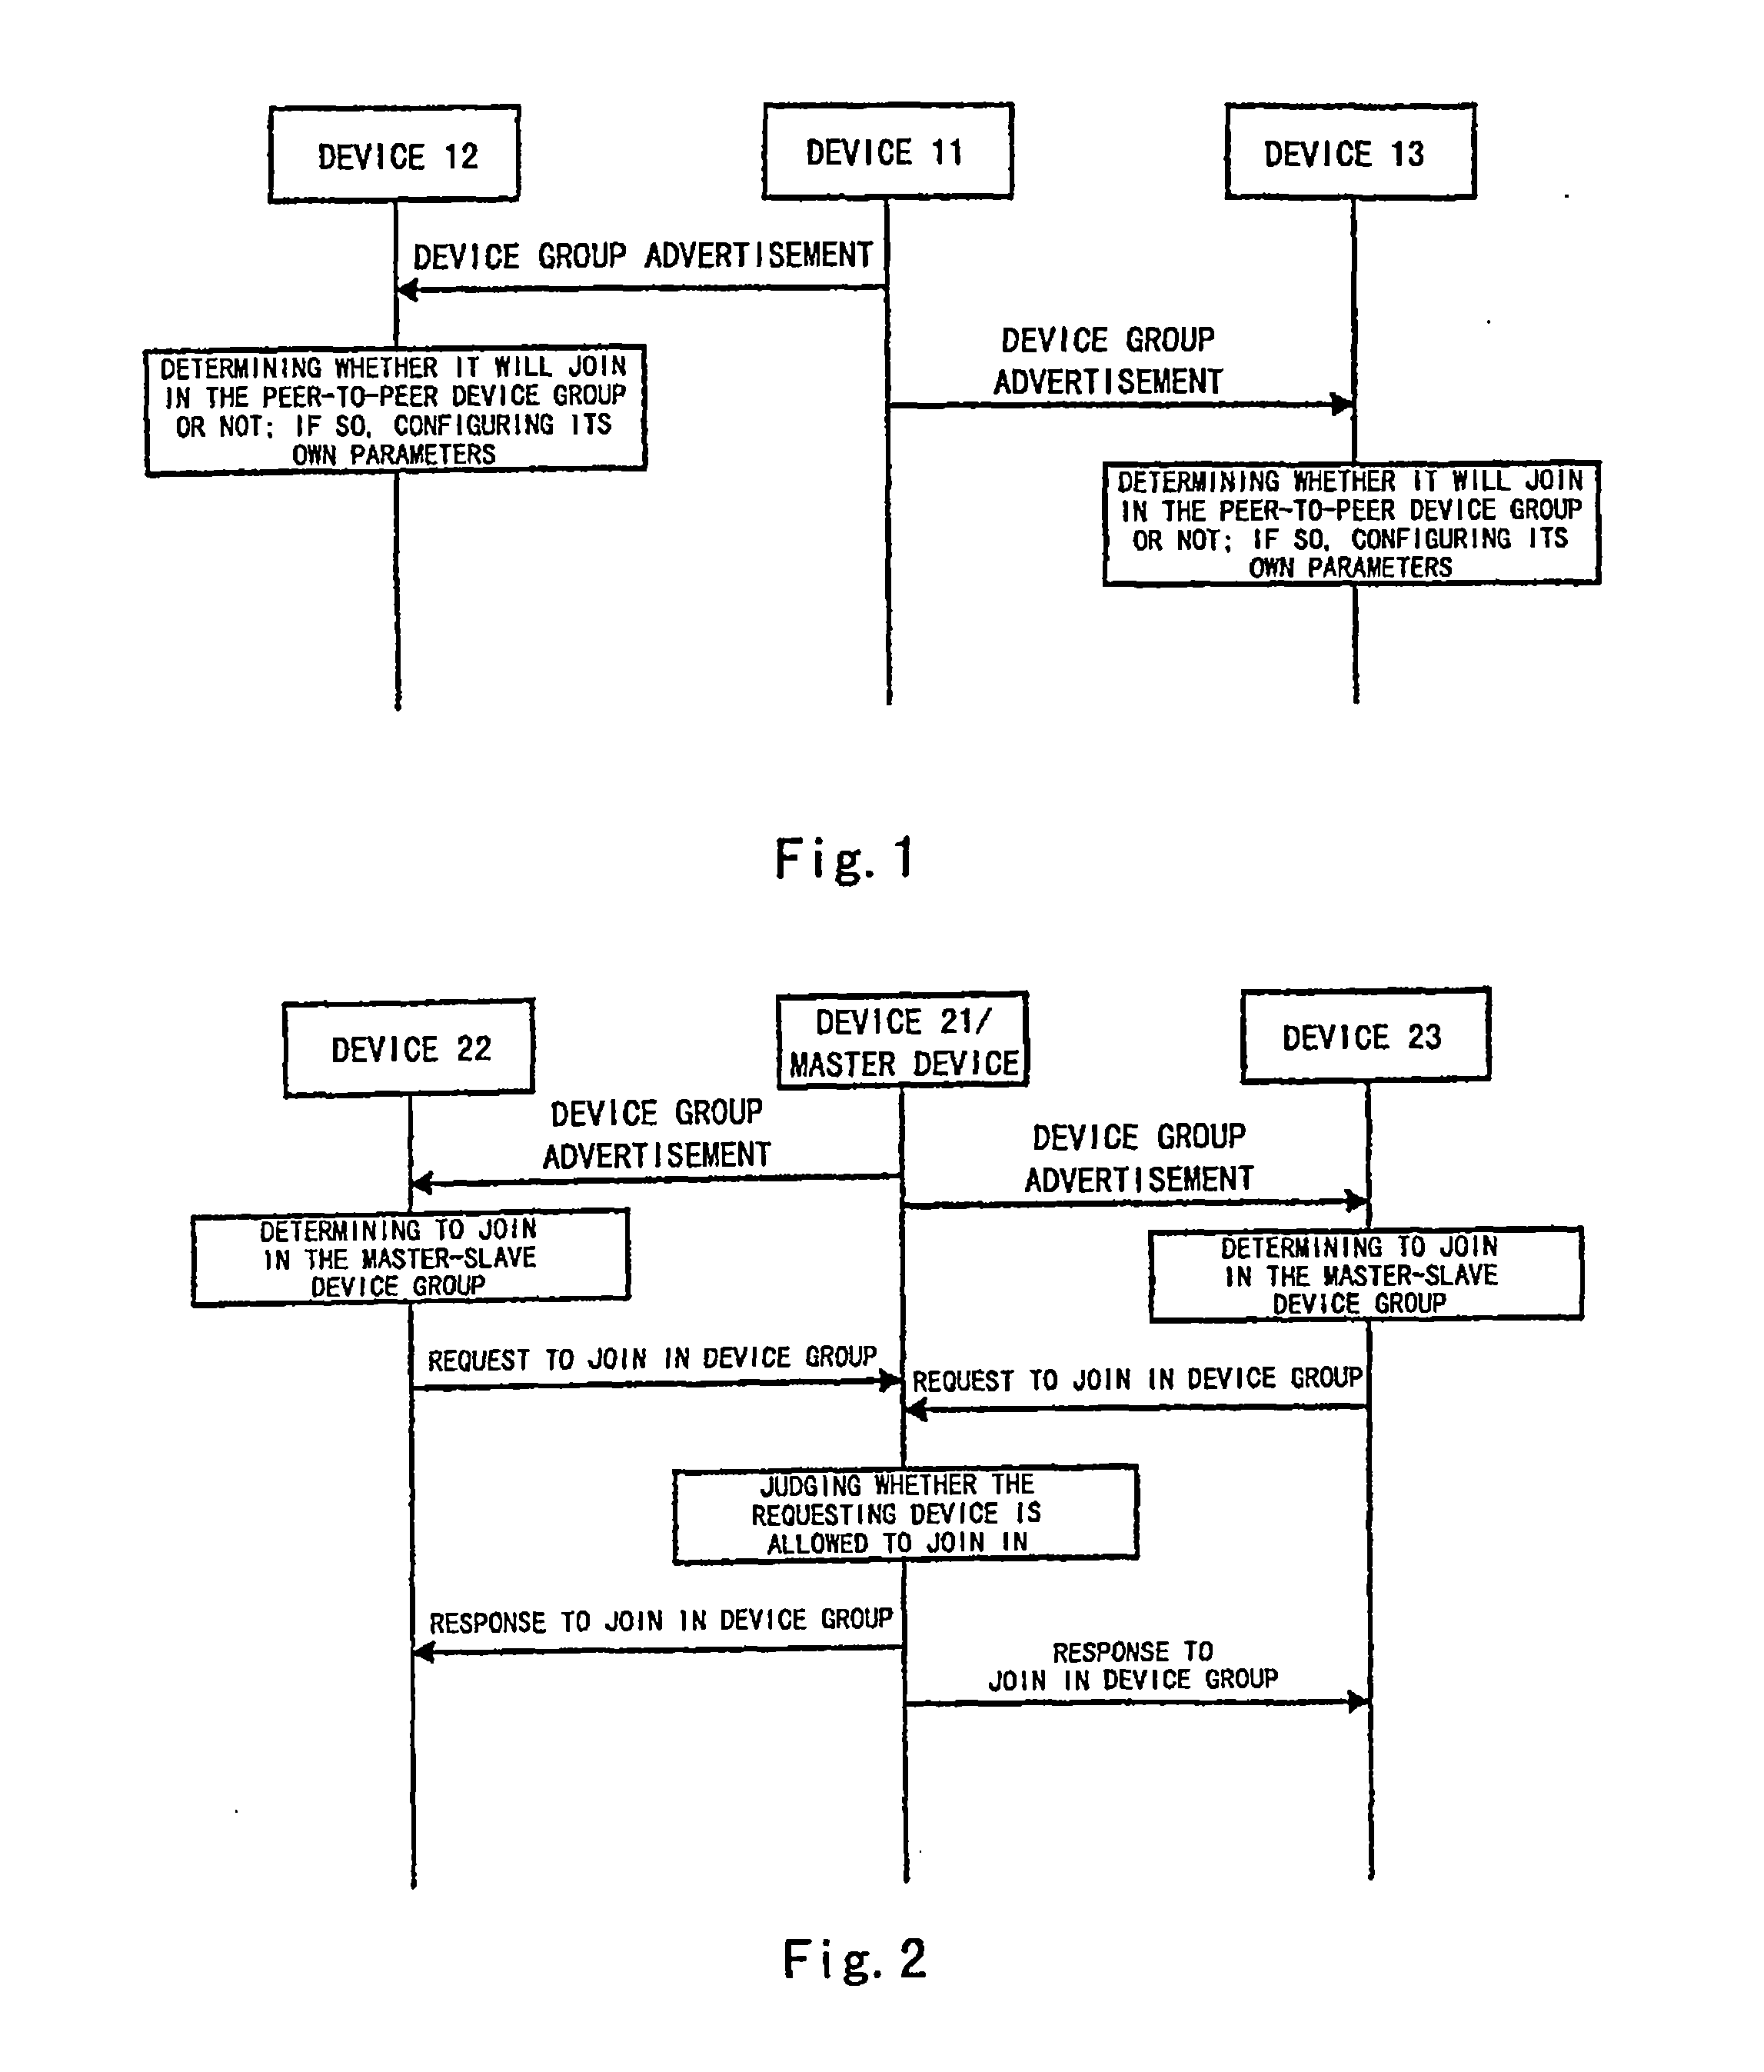 Method for Implementing Grouping Devices and Interacting Among Grouped Devices